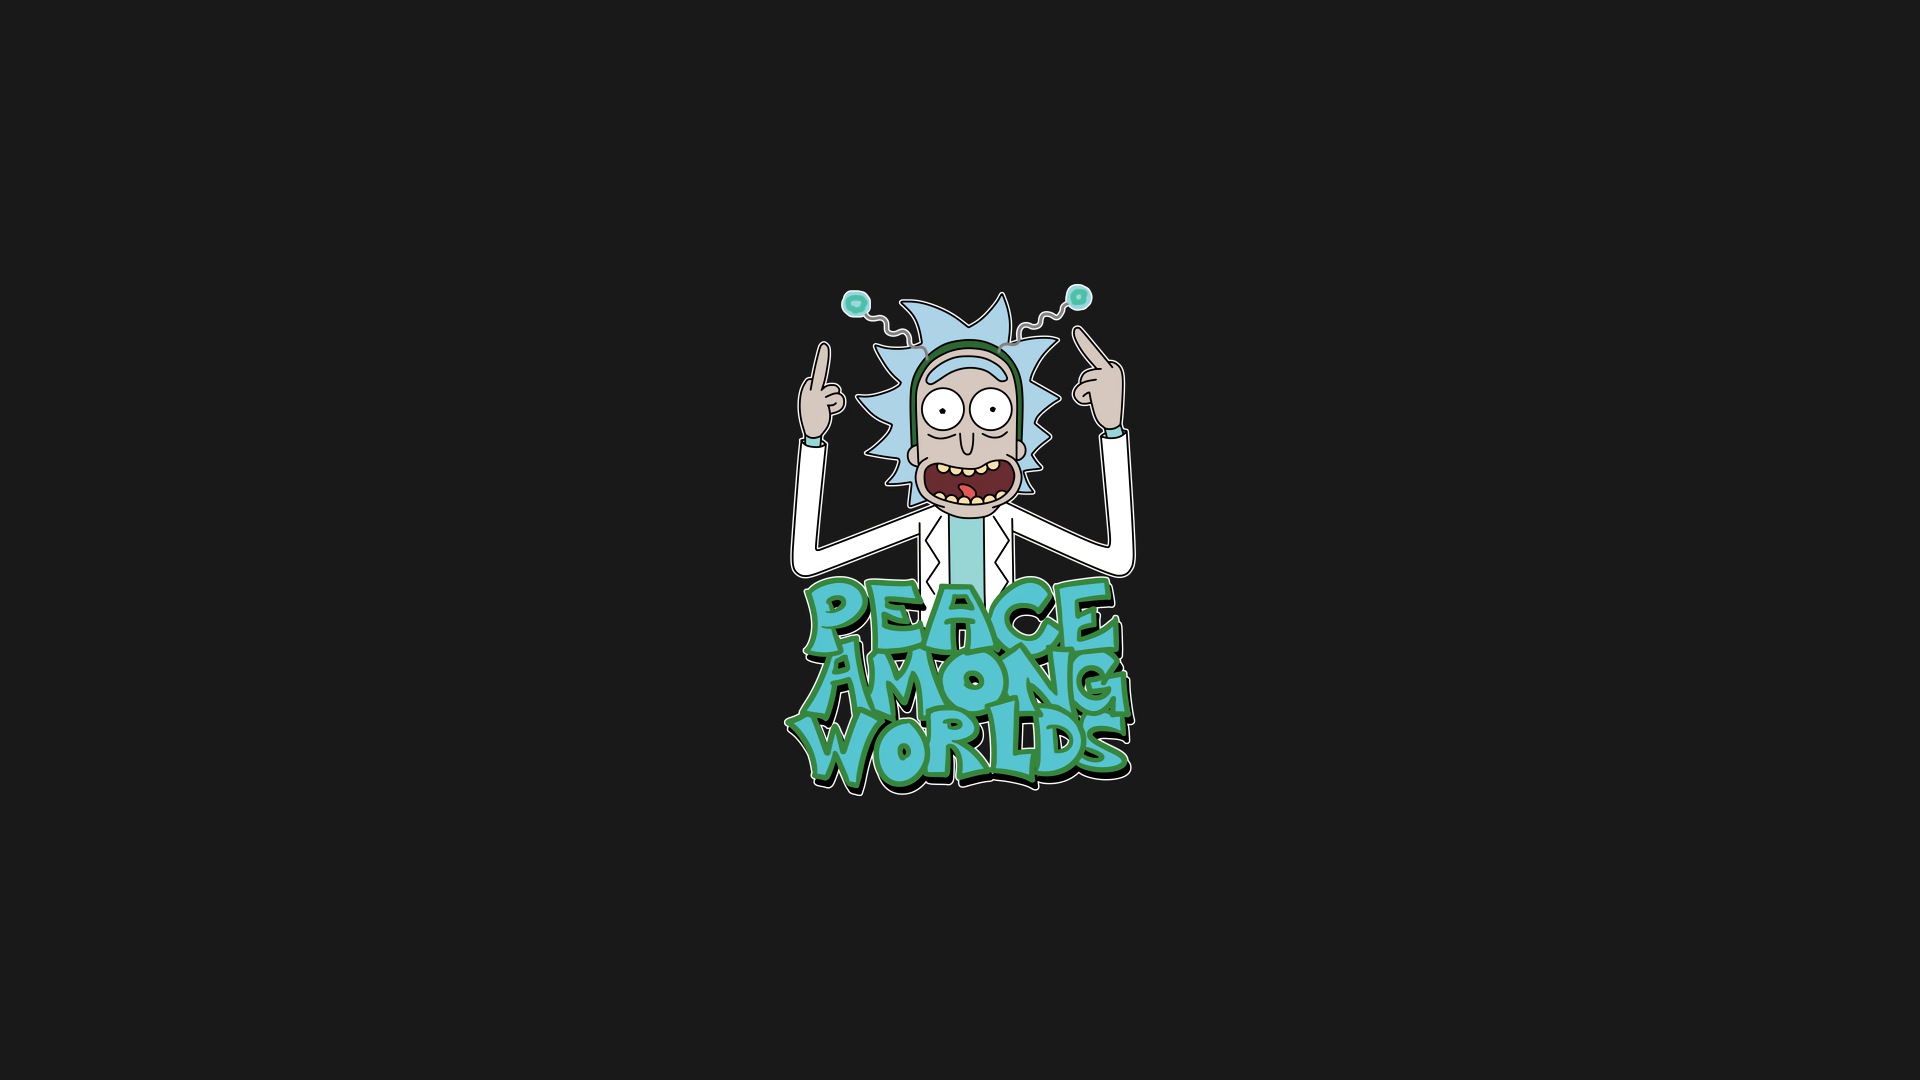 General 1920x1080 Rick and Morty simple background Rick Sanchez TV cartoon humor turquoise